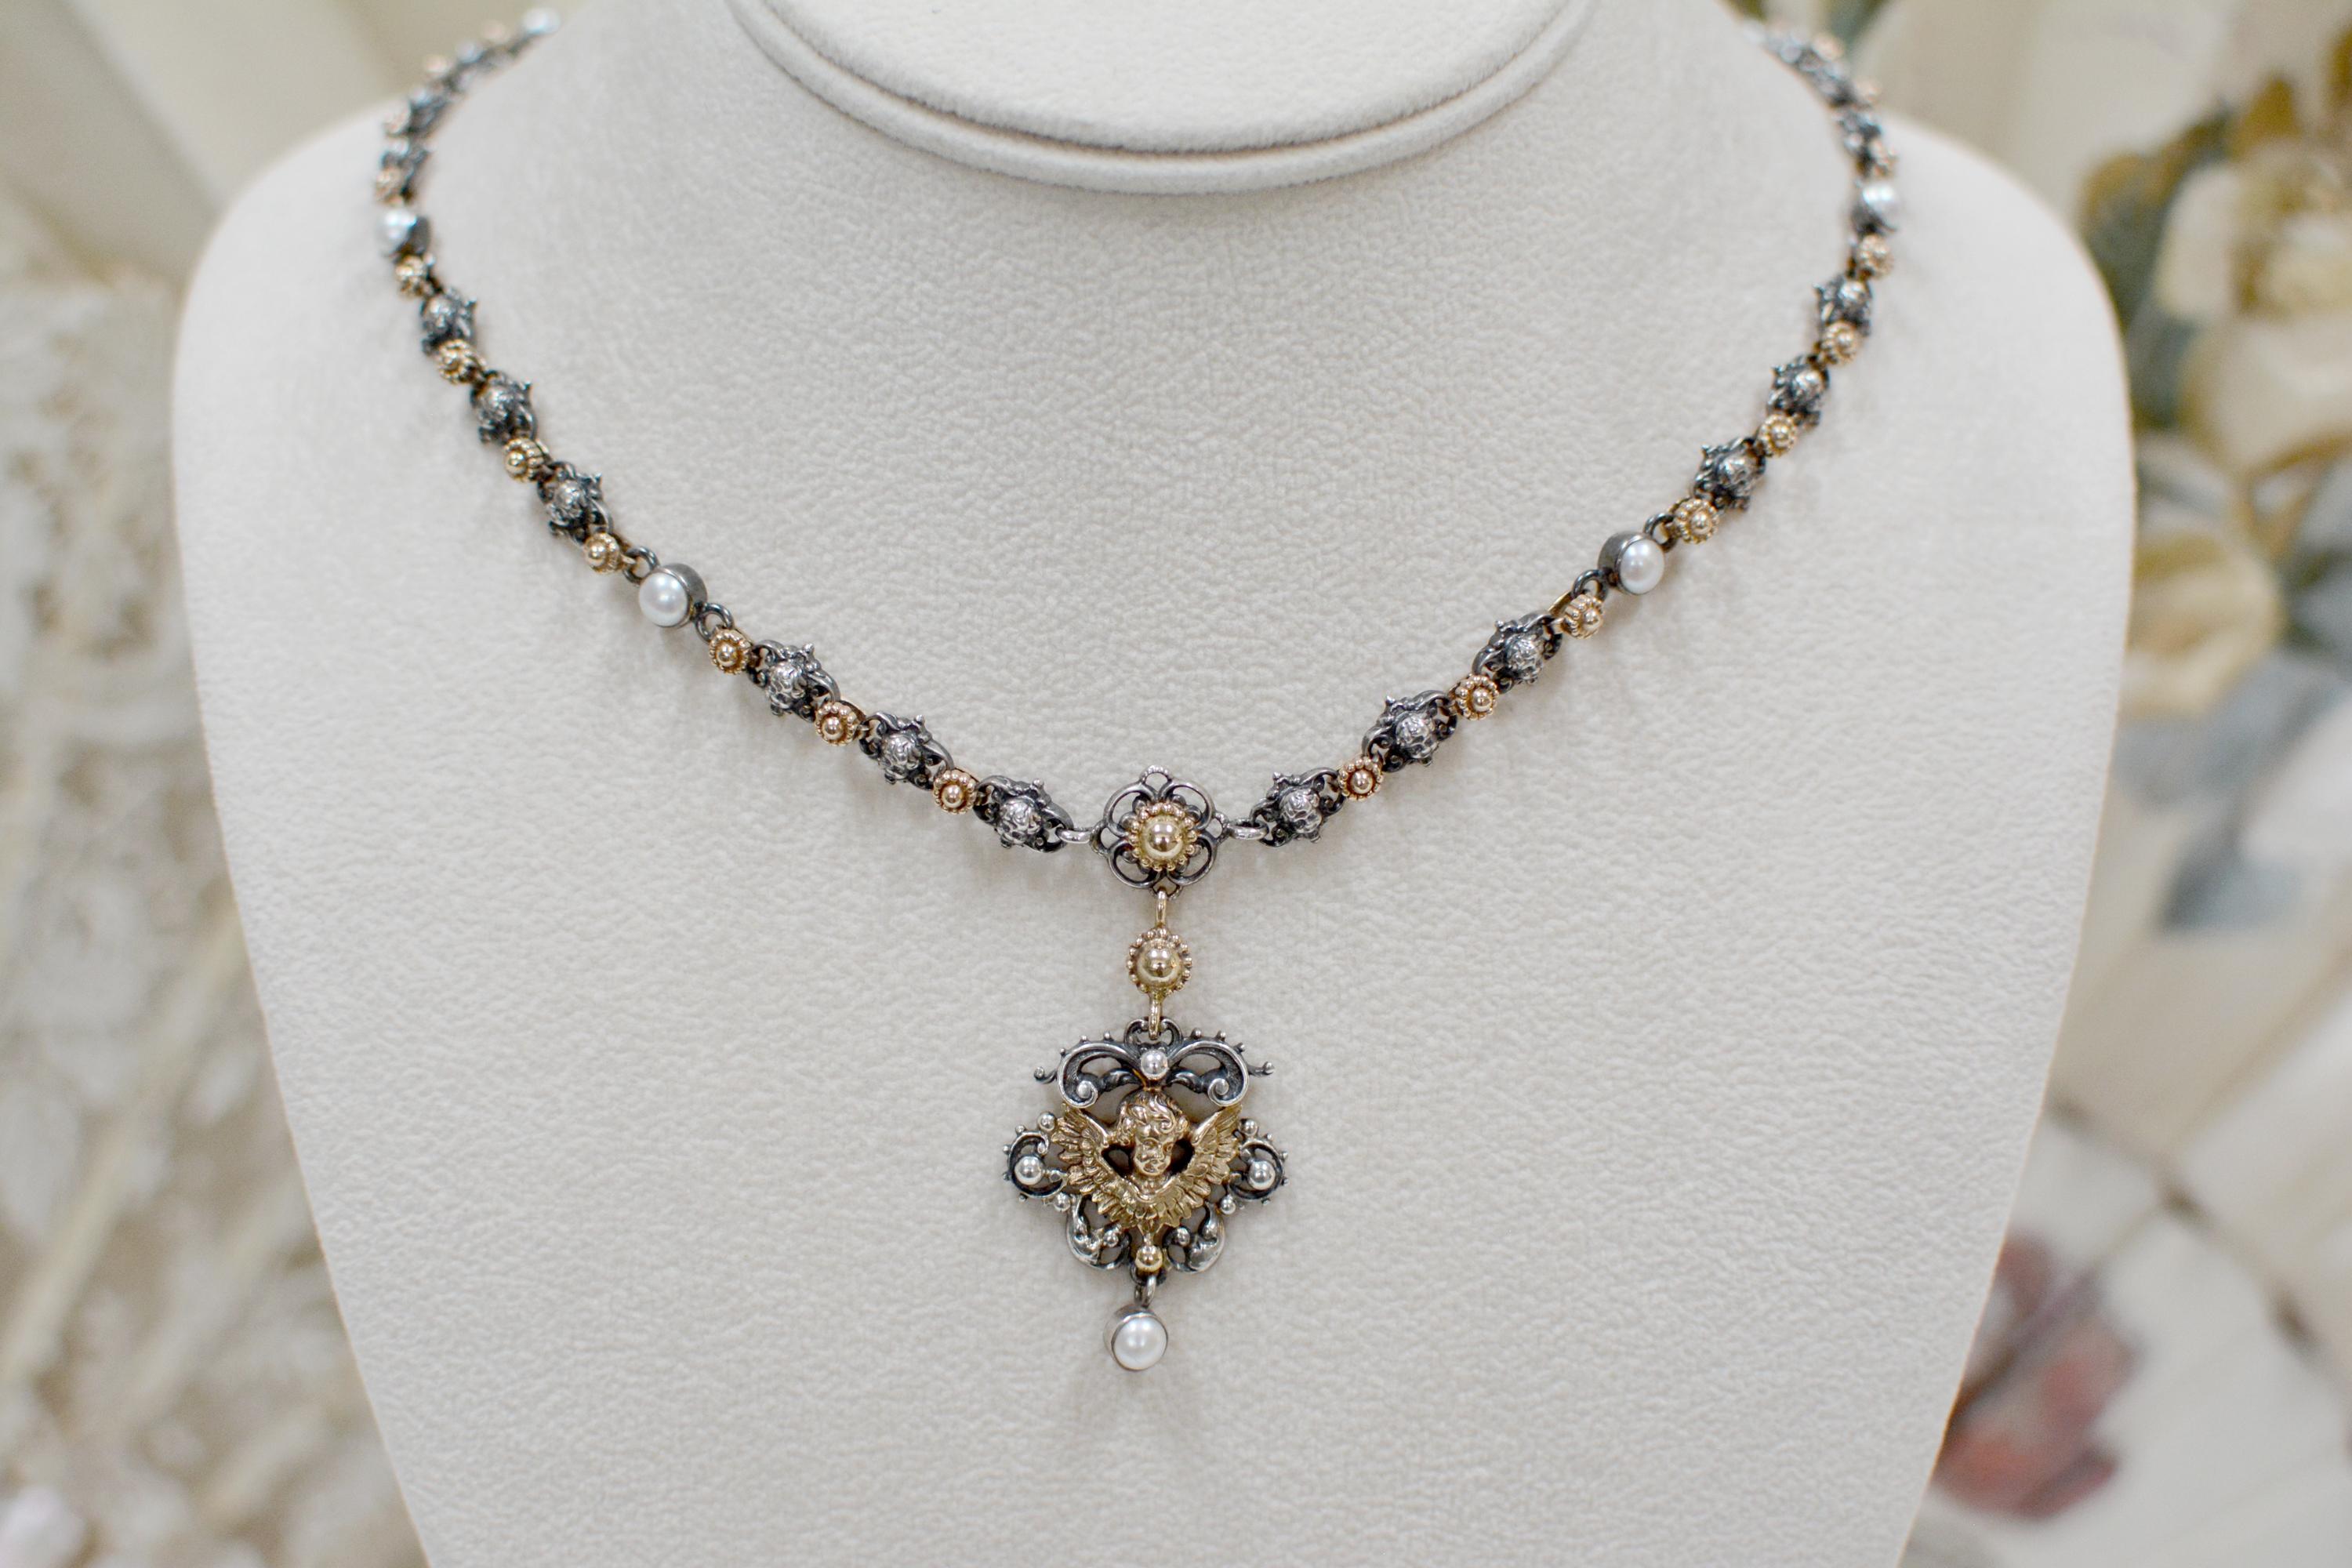 This exquisite Jill Garber drop necklace is comprised of twenty eight very fine figural cherub angel links, joined together by finely cast 14 karat gold flower links. Eight natural freshwater pearls are bezel set in sterling silver and evenly